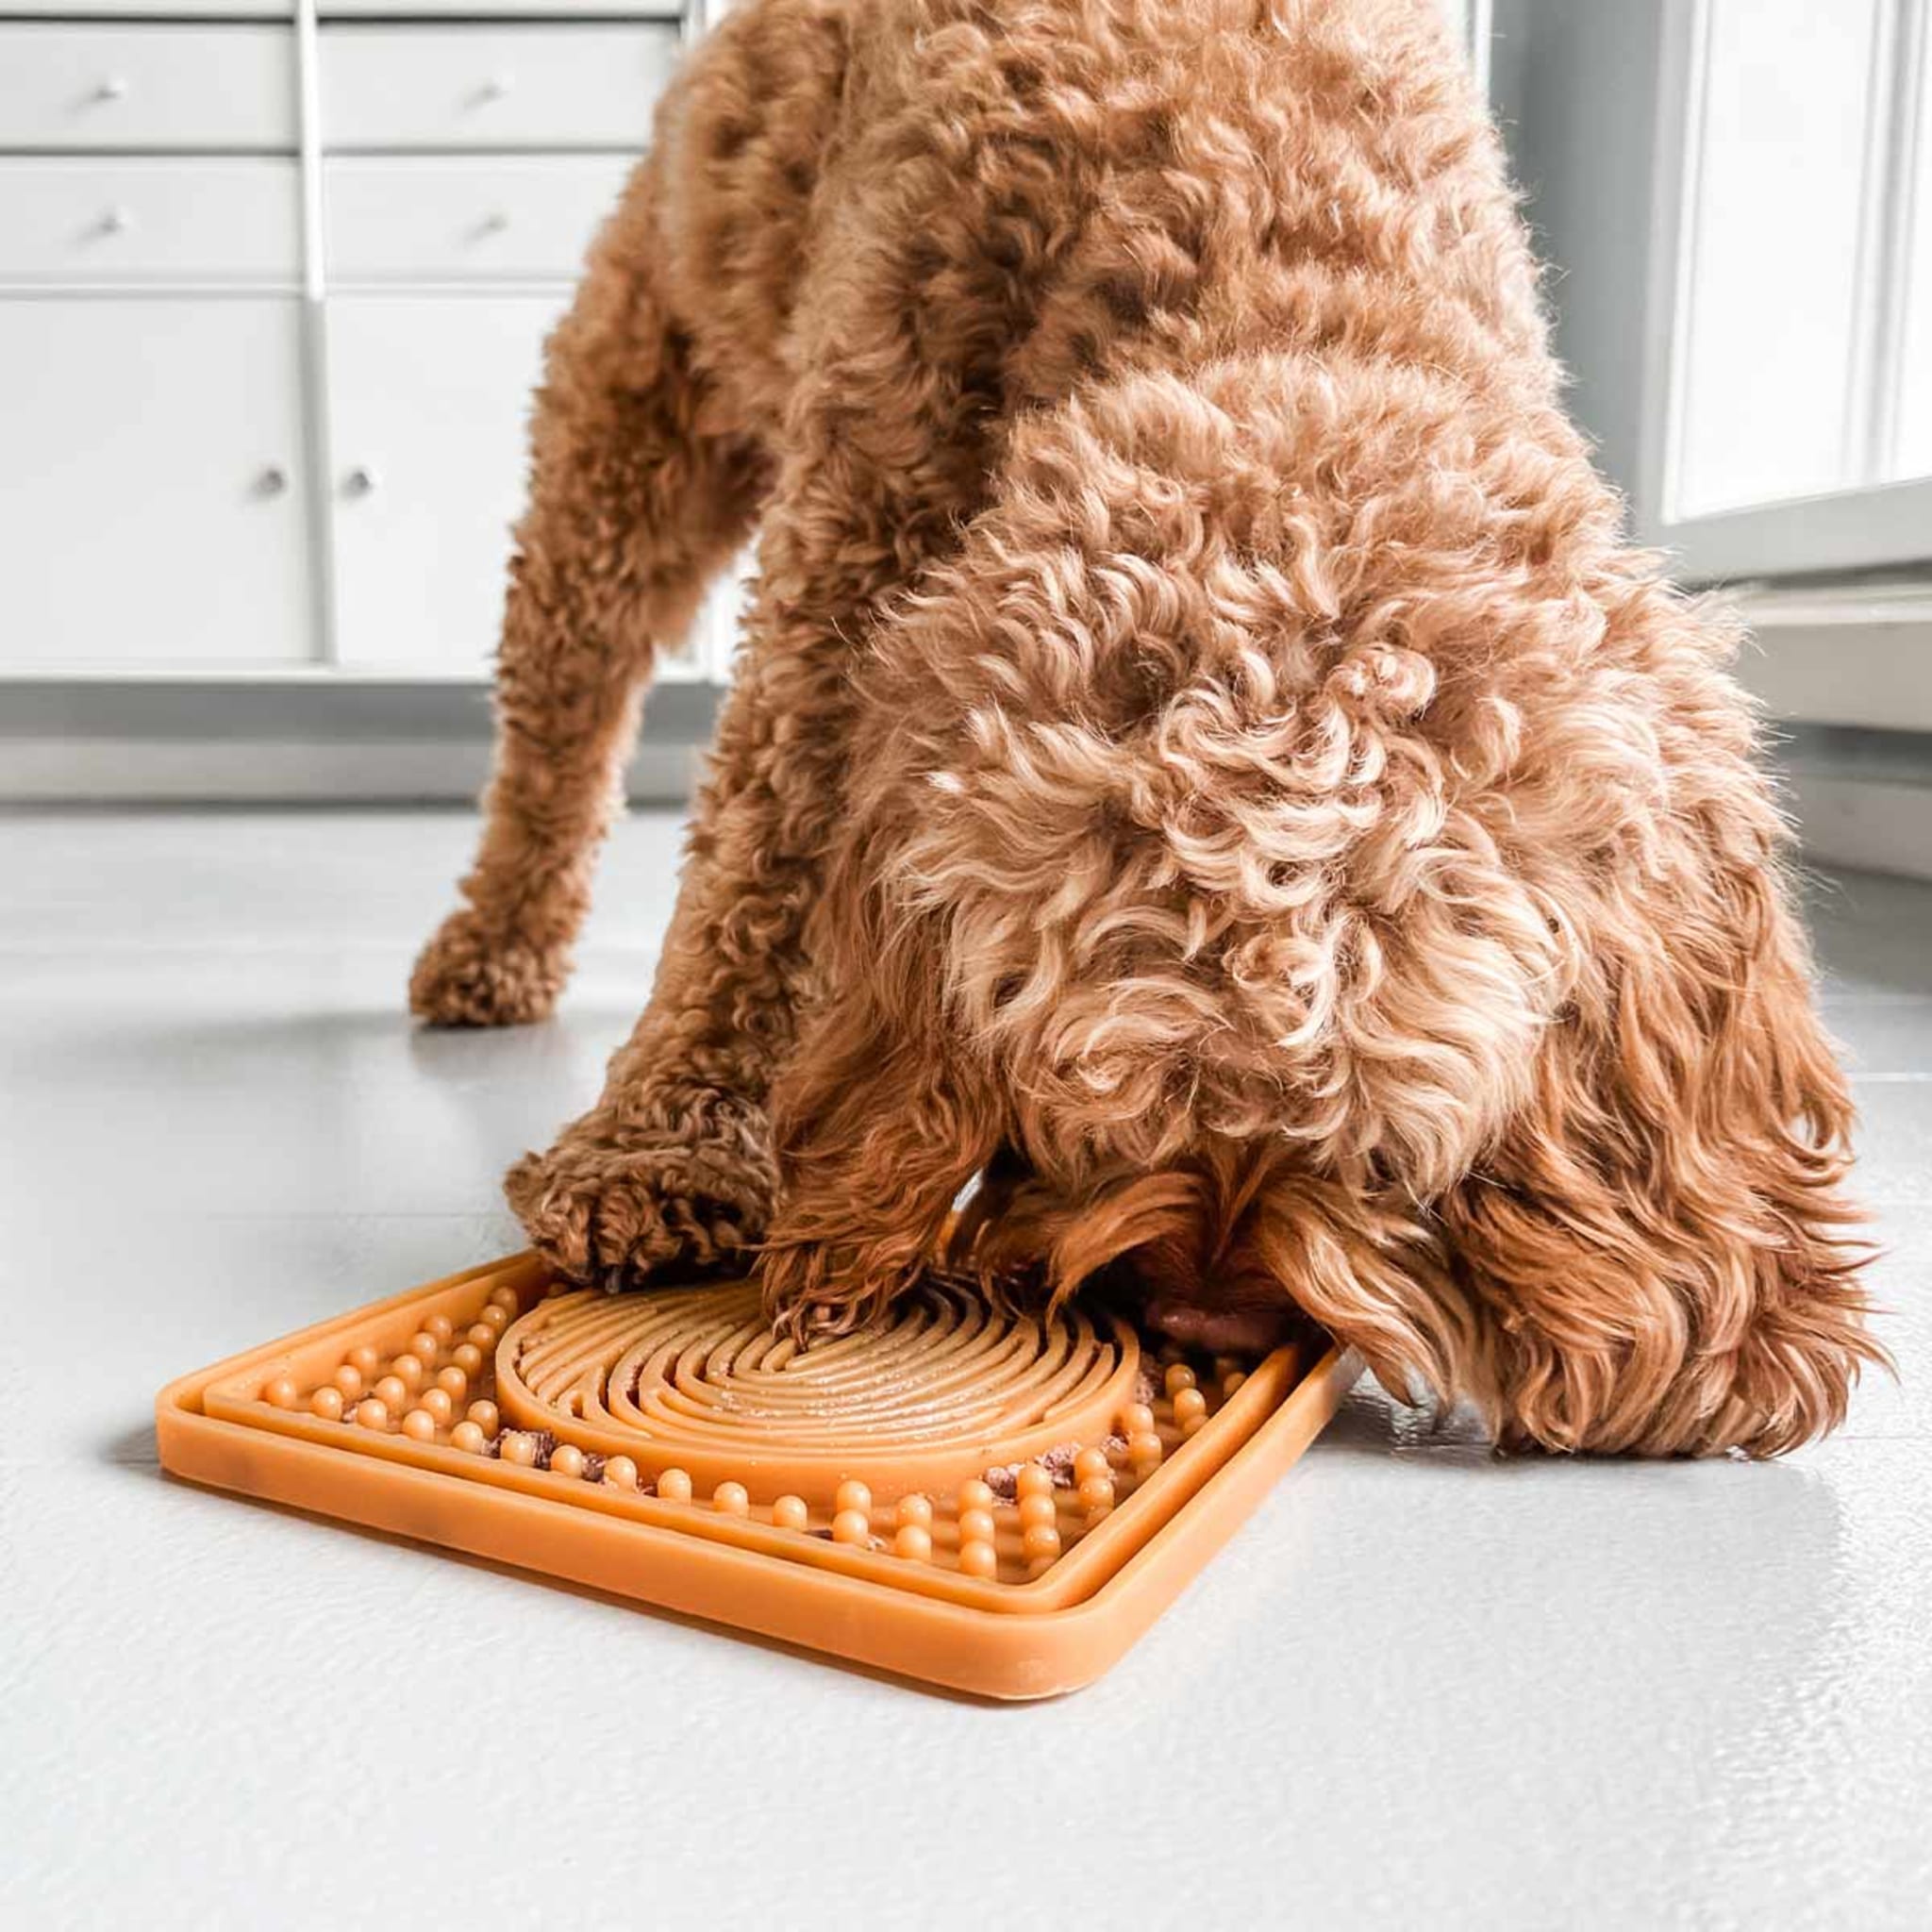 Dog Licking Mat in Natural Rubber –